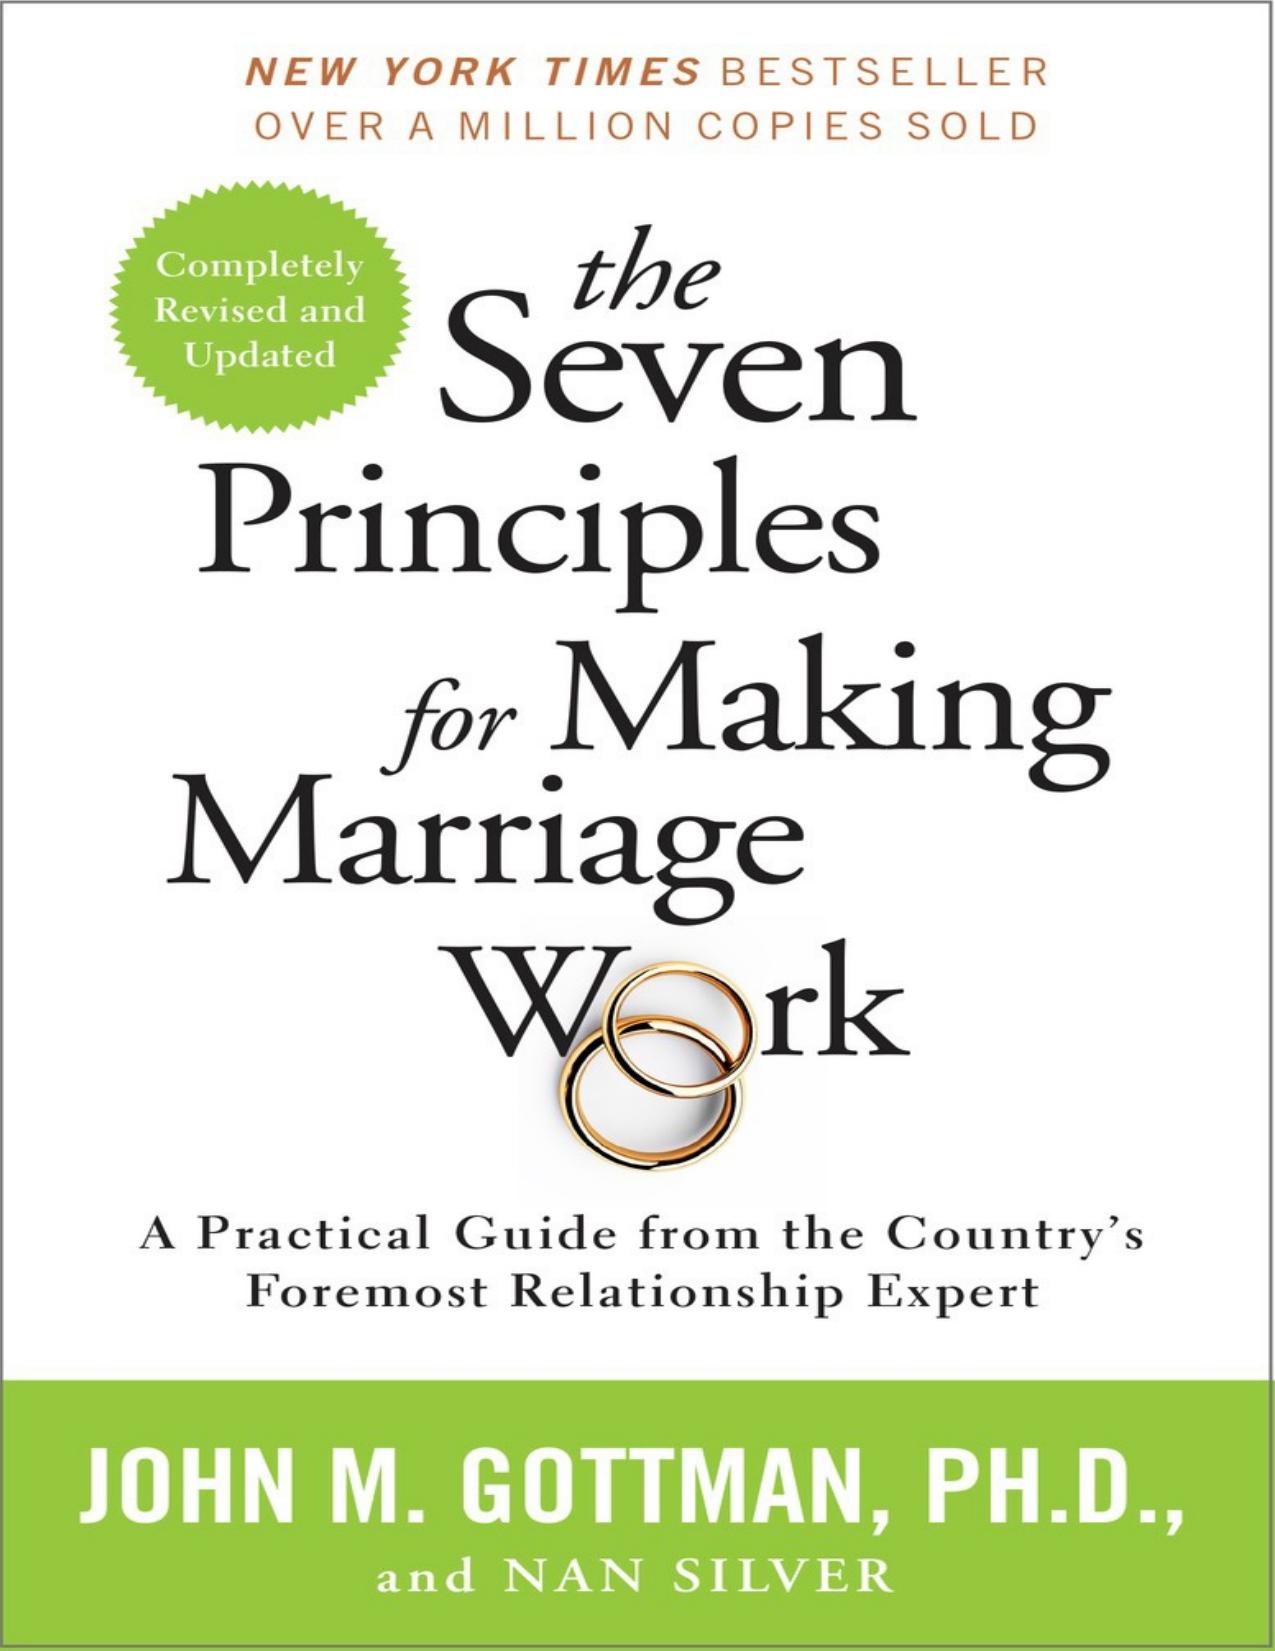 The Seven Principles for Making Marriage Work: A Practical Guide from the Country’s Foremost Relationship Expert - PDFDrive.com